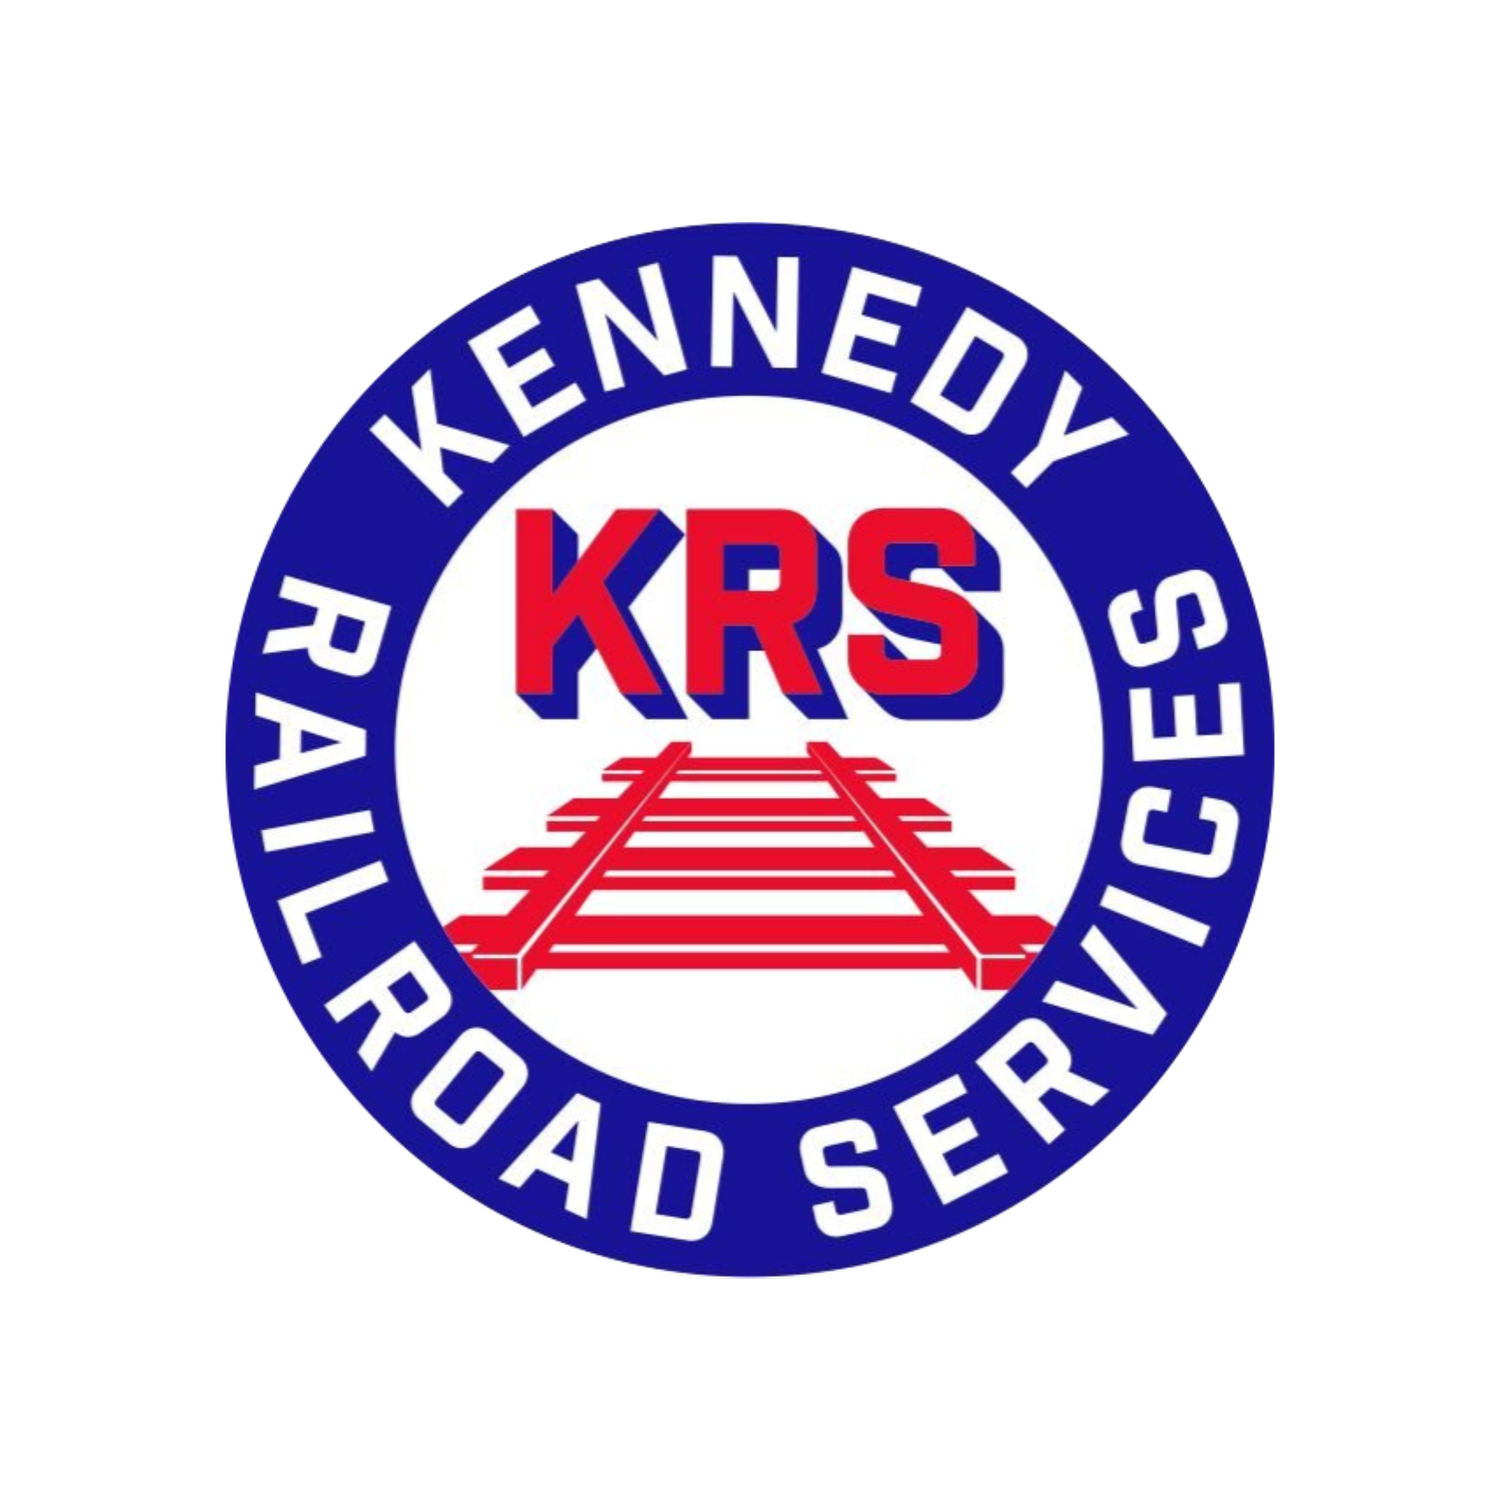 Kennedy Railroad Services (KRS)